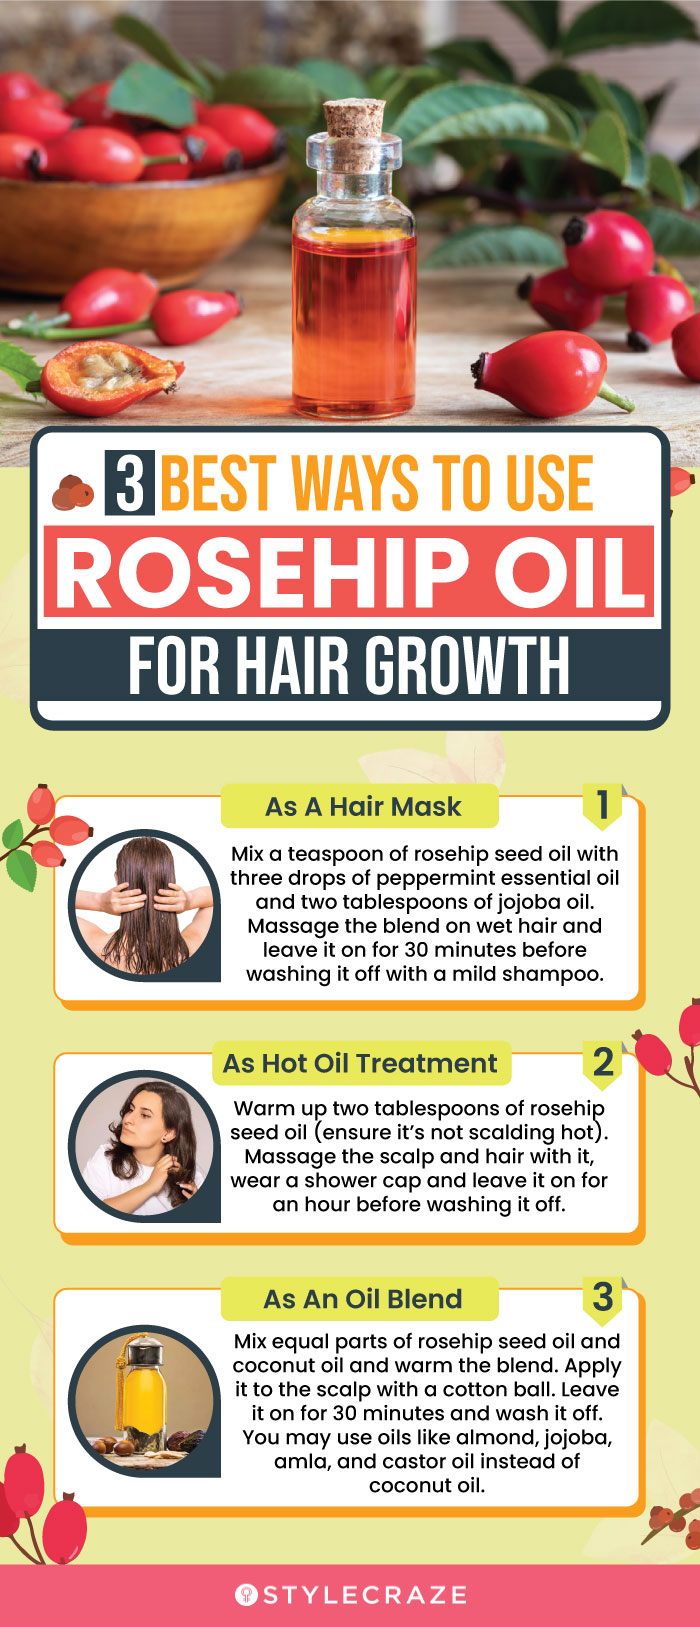 Buy Kalp Rosehip Seed Oil  100 Pure Natural Undiluted Cold Pressed  For Face Acne Scar Skin lightening Pigmentation lips hair Growth30ml  Online at Low Prices in India  Amazonin